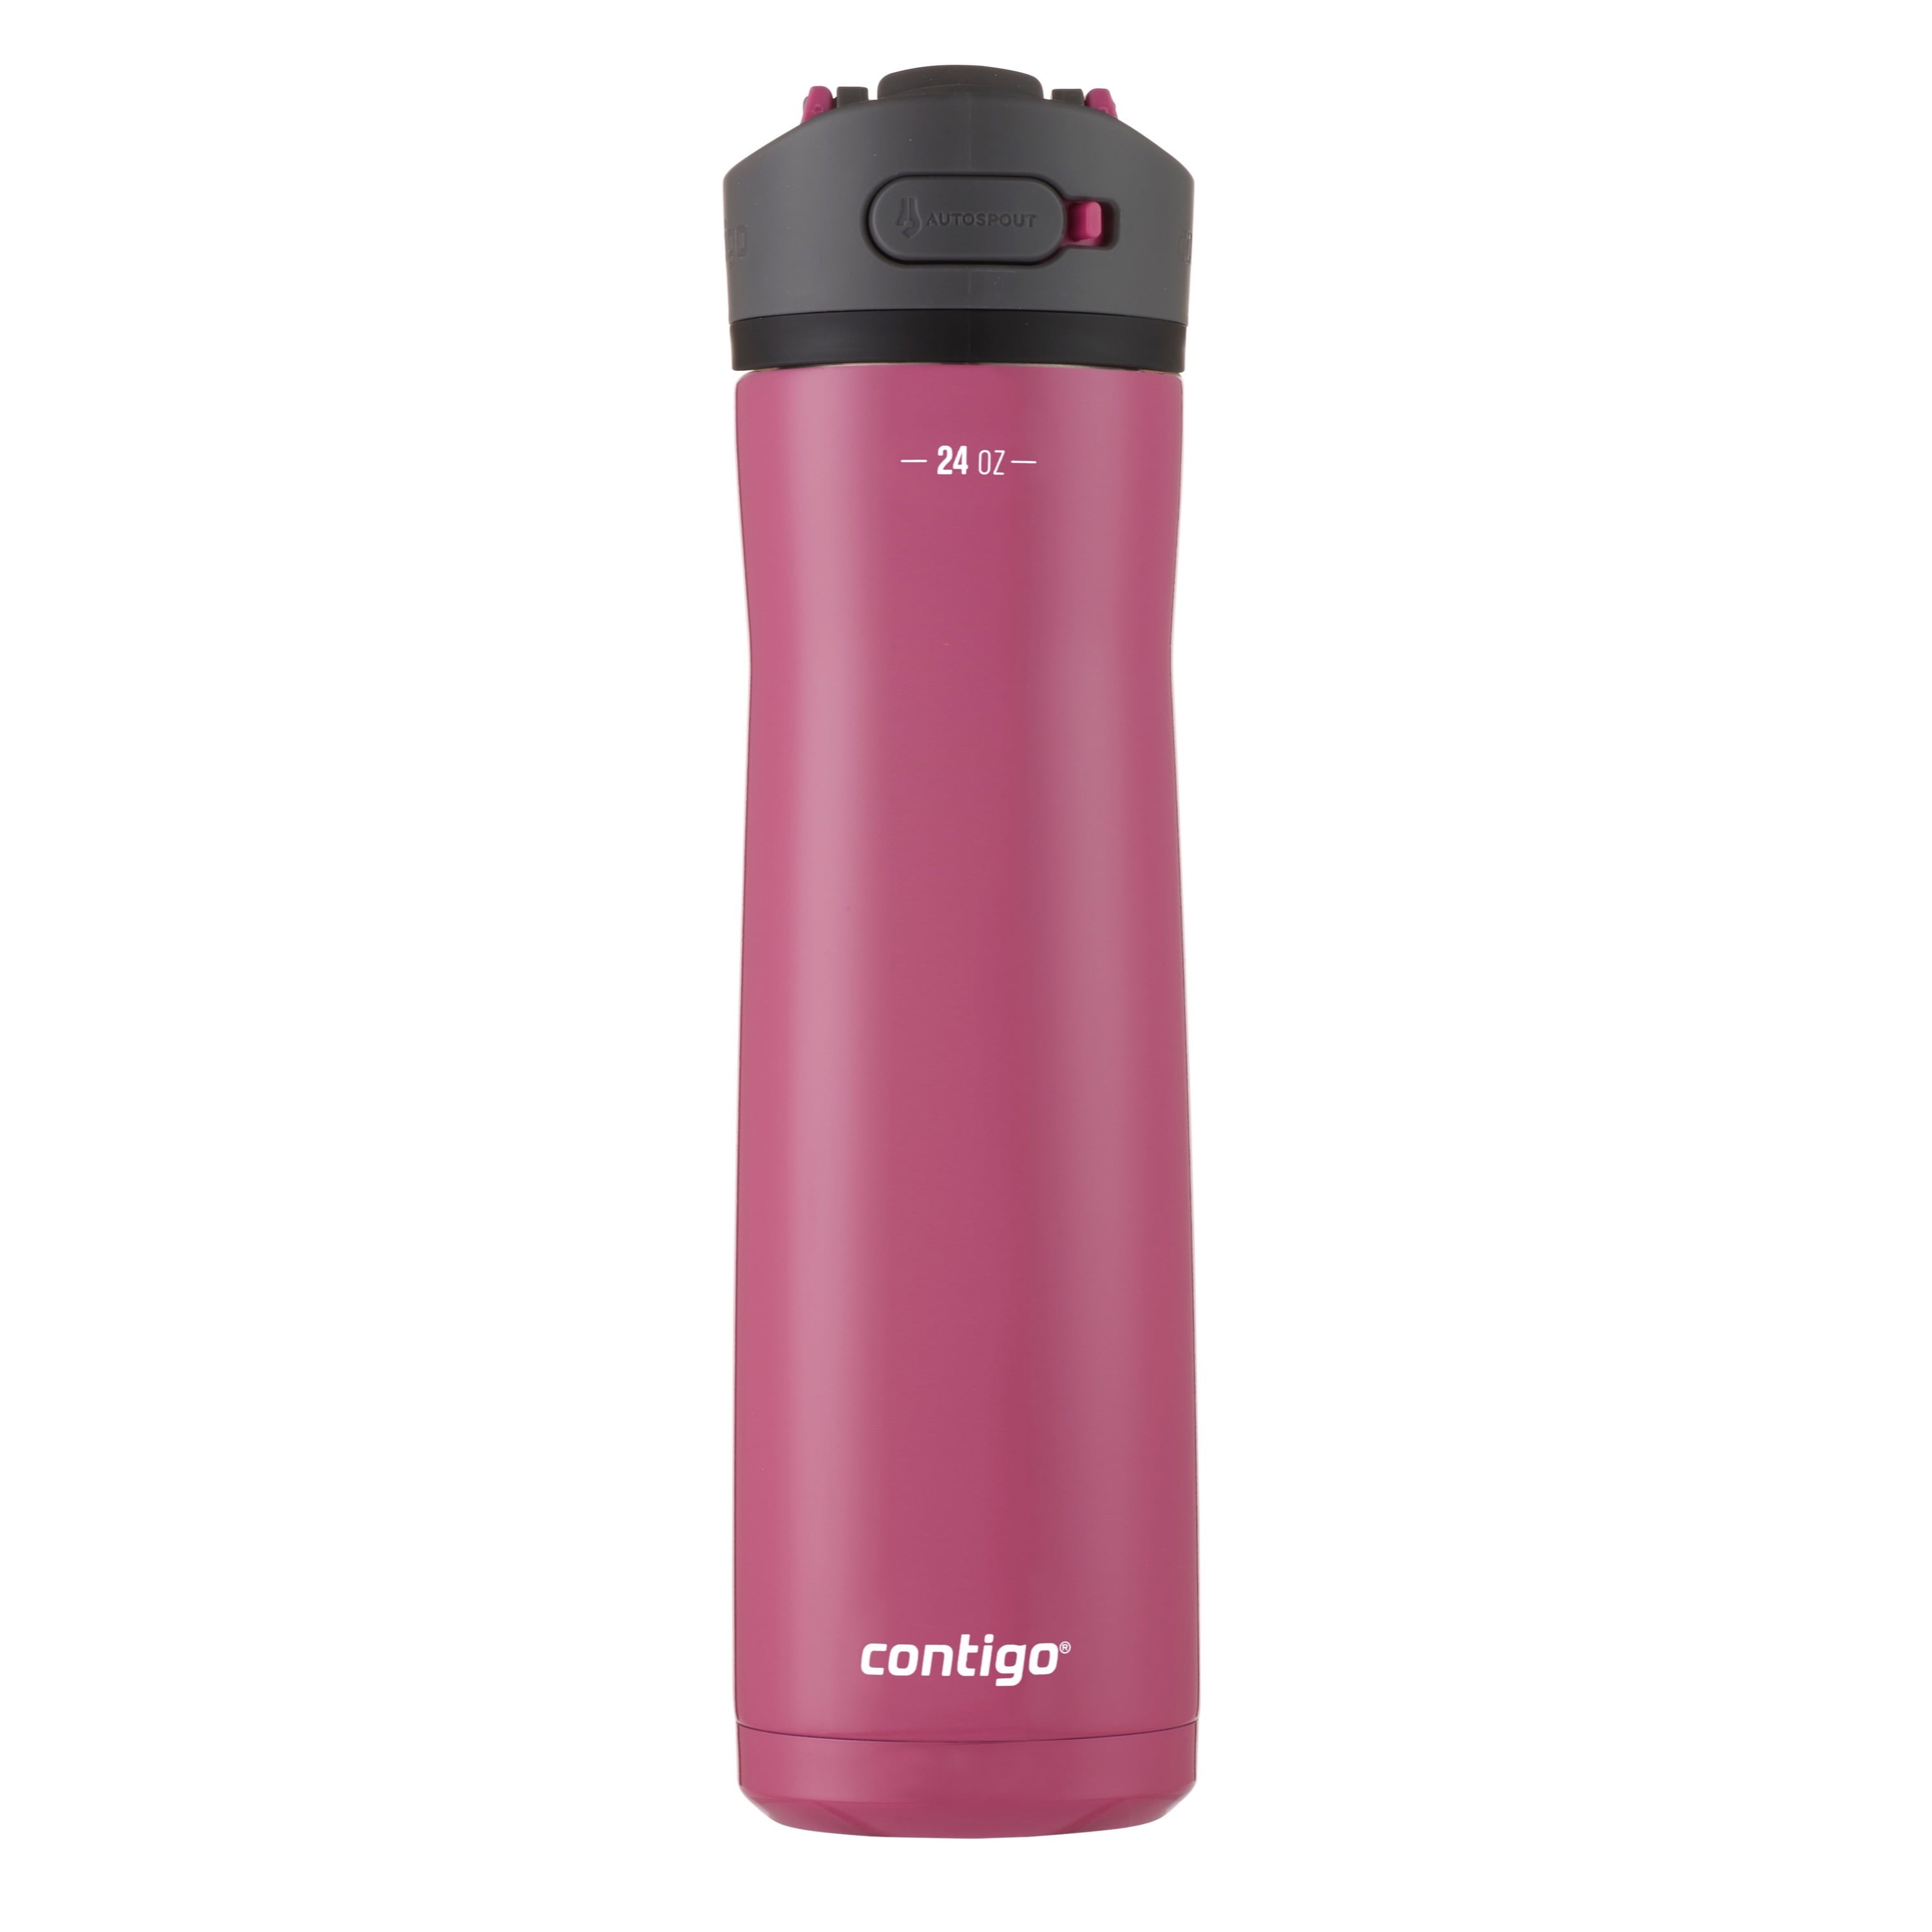 Wells Chill Stainless Steel Filter Water Bottle with AUTOSPOUT